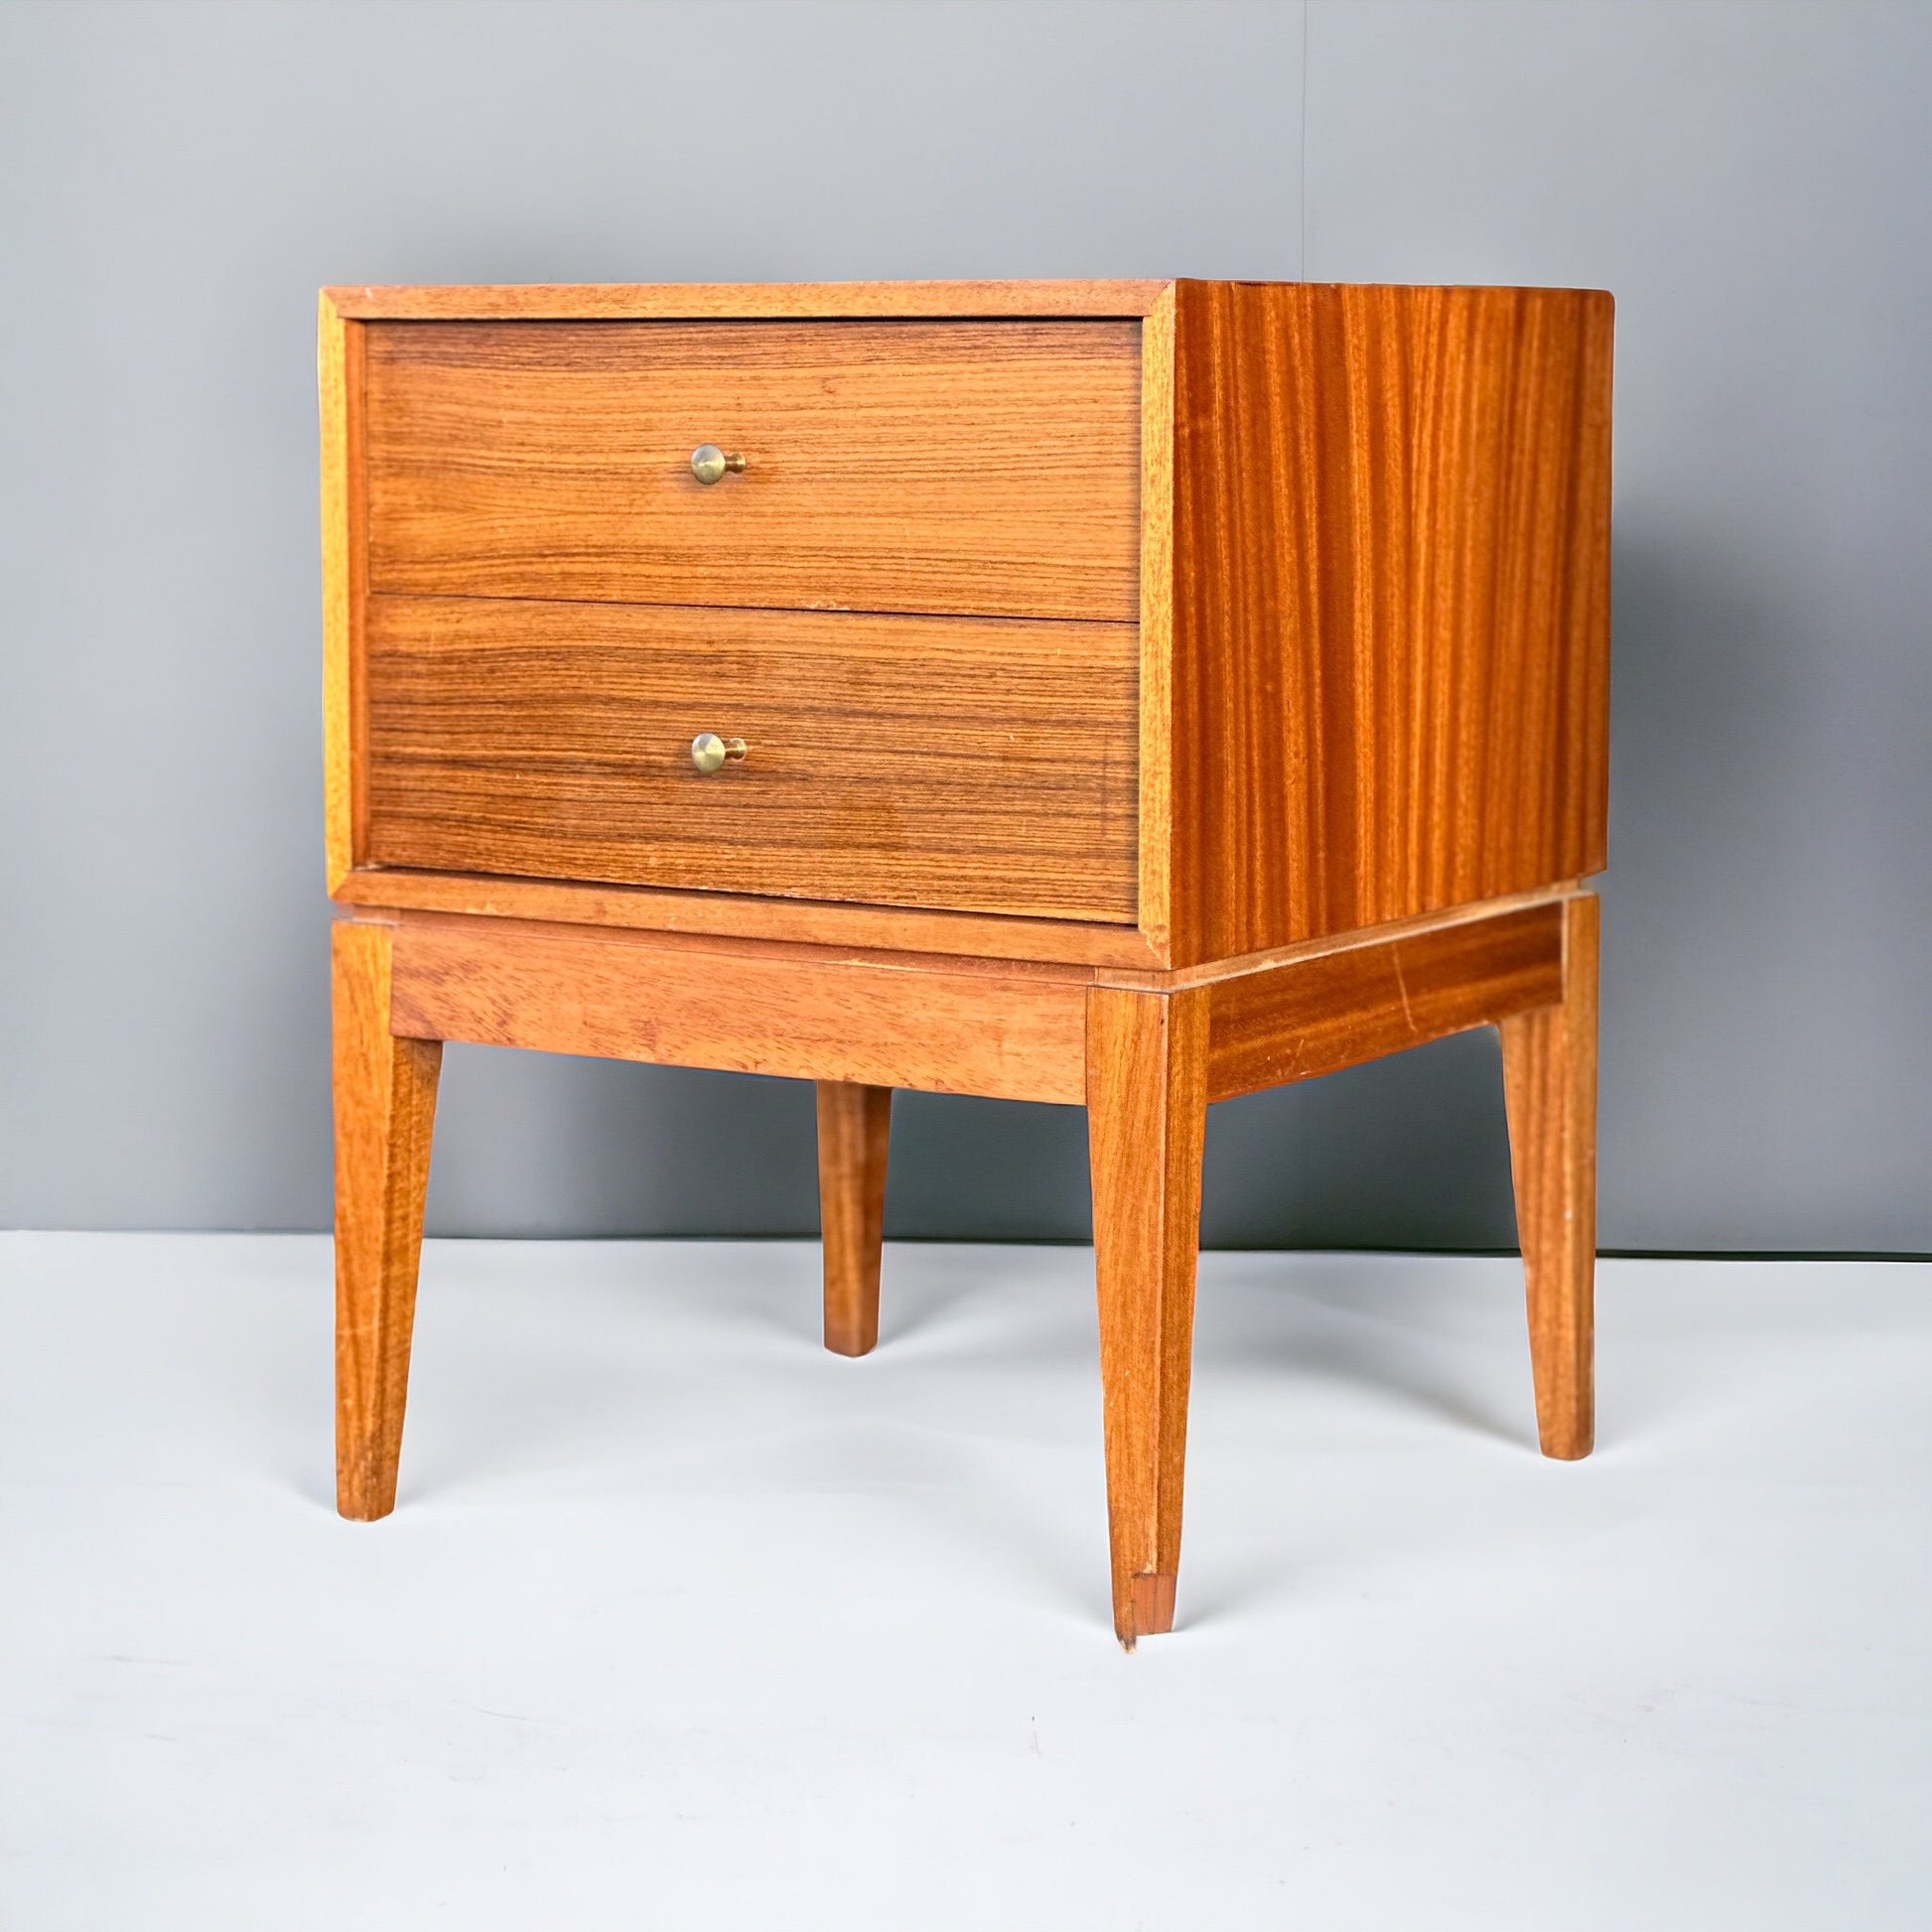 A Midcentury Two Drawer Bedside Cabinet by Uniflex 1960s